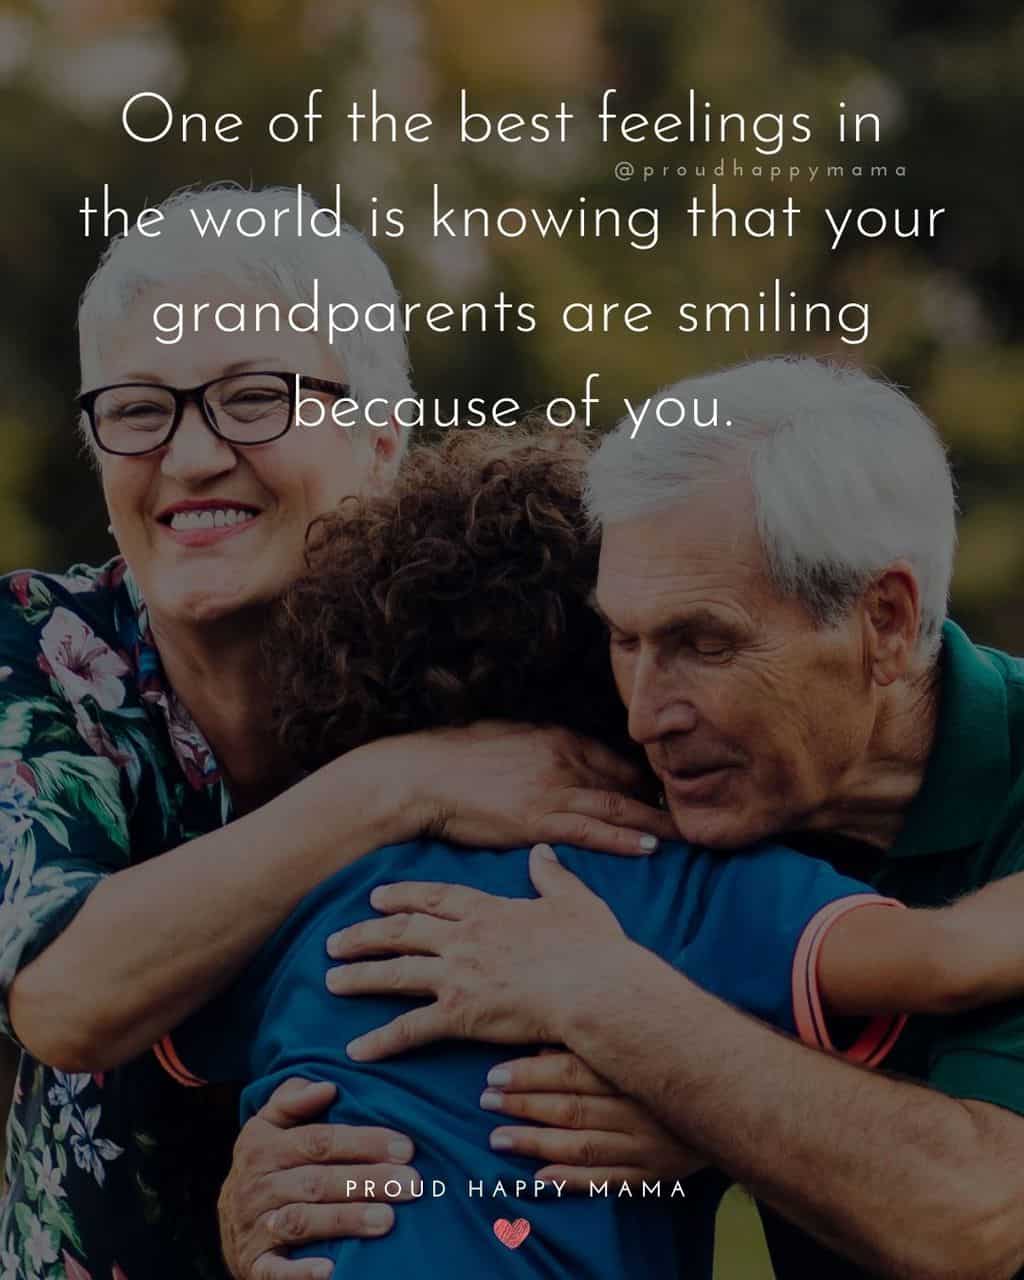 Grandparent Quotes – One of the best feelings in the world is knowing that your grandparents are smiling because of you.’